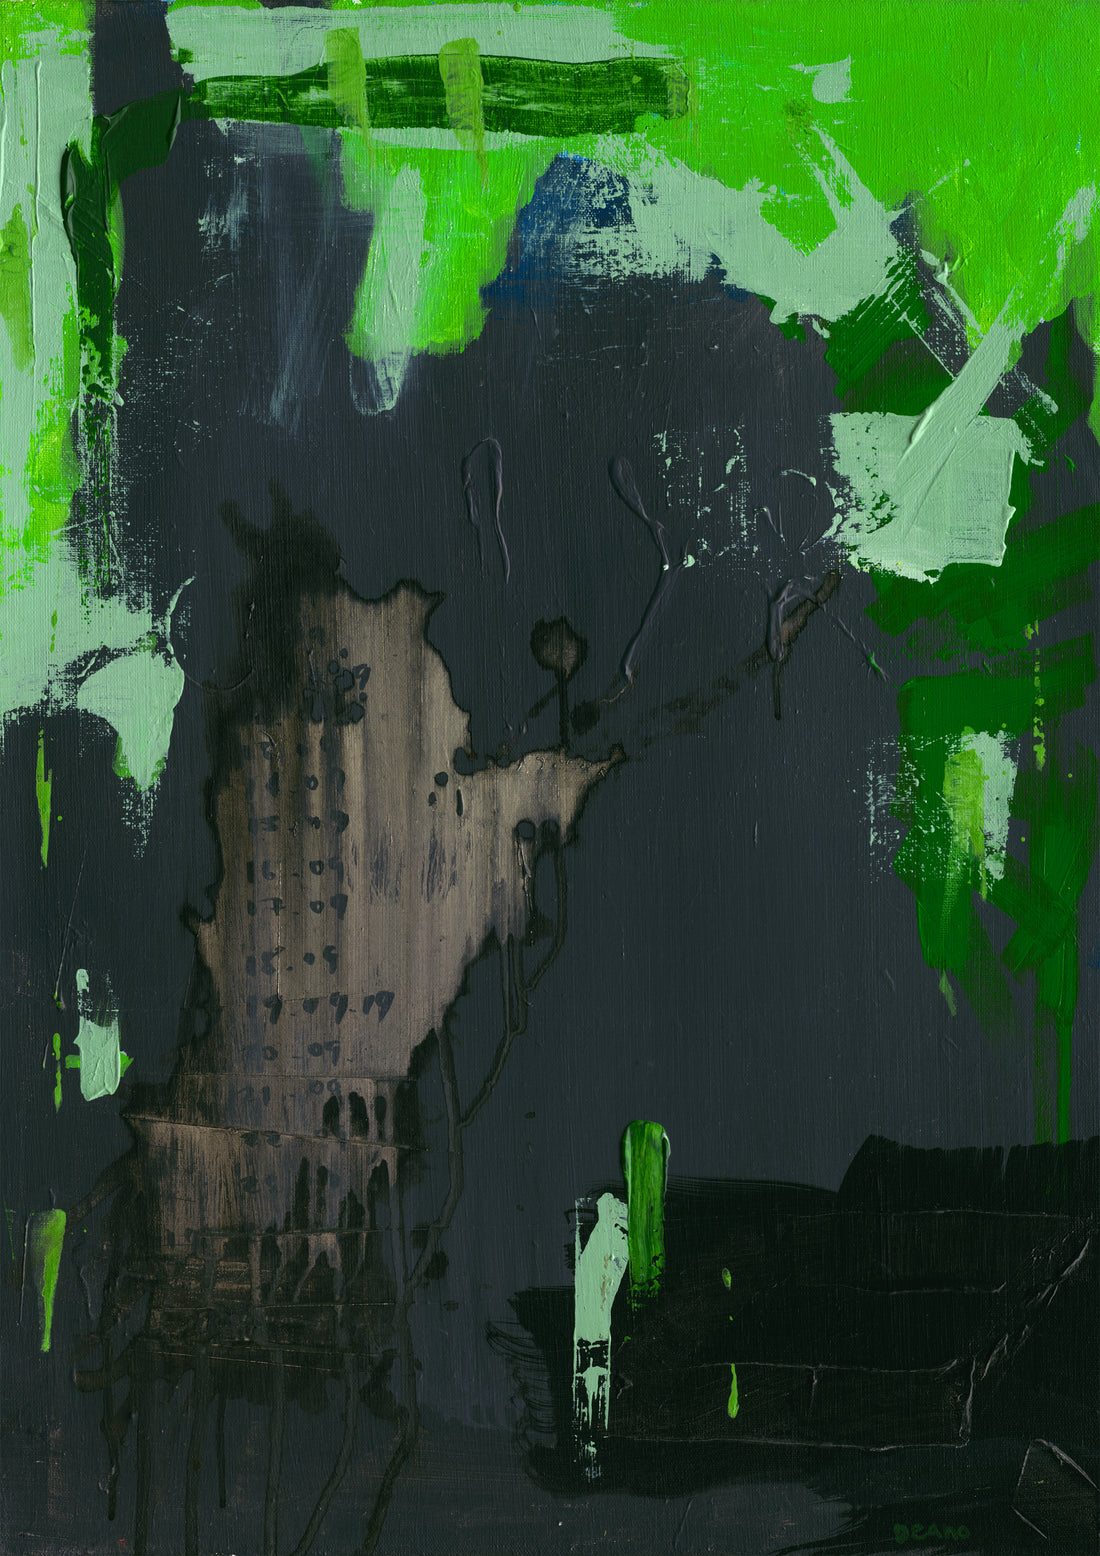 A close-up of an abstract limited edition Giclée print titled ‘Countdown’. The print showcases a fusion of greens and blacks, enriched by a subtle backdrop of mysterious date sequences.